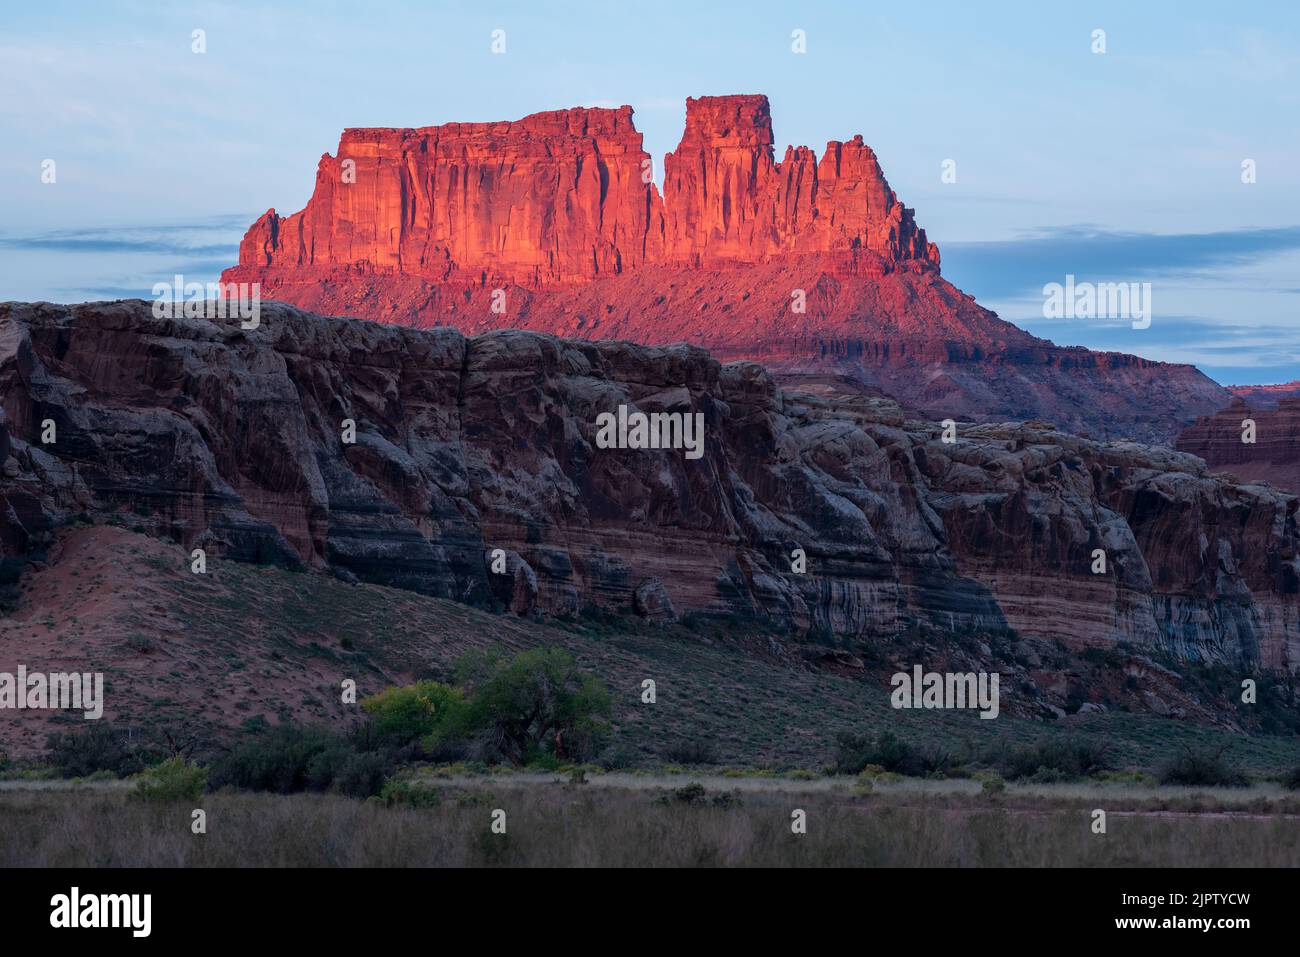 Alpenglow on butte, Canyonlands National Park, Utah. Stock Photo